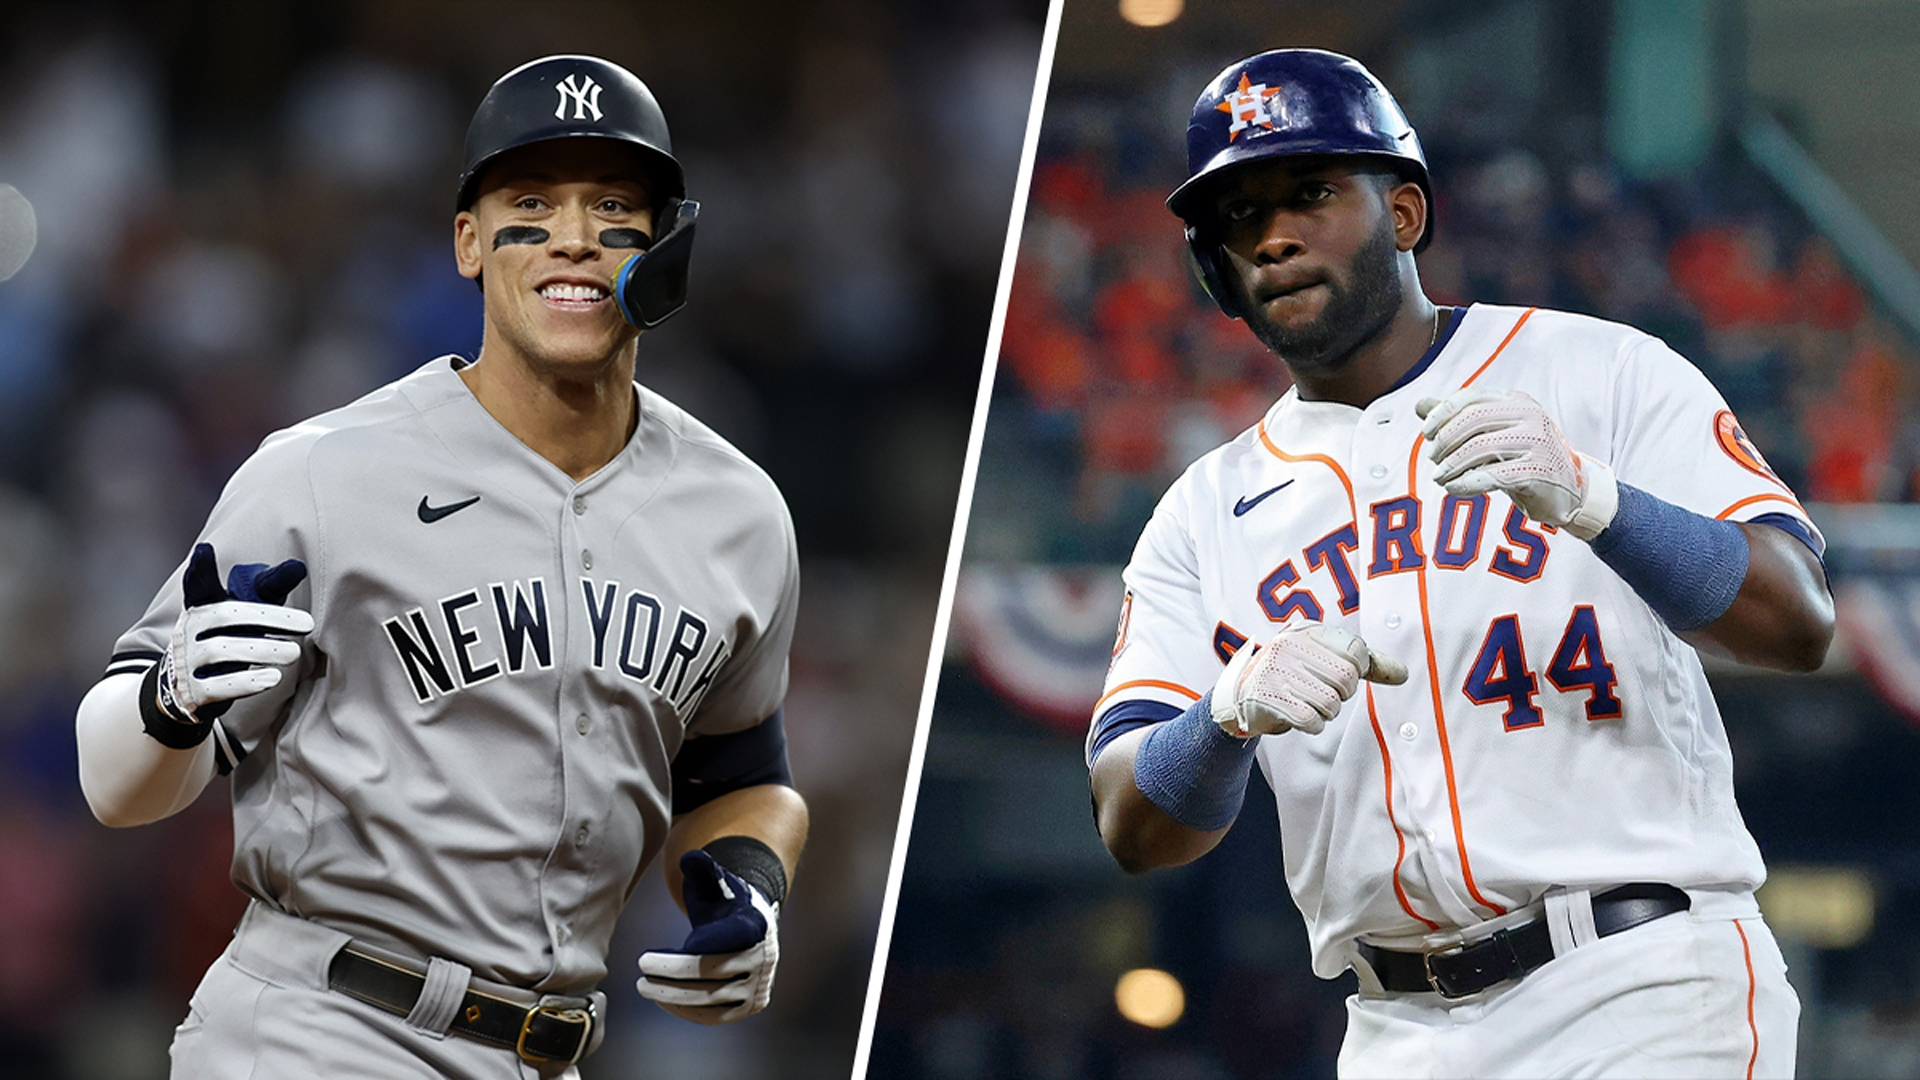 How to Watch Yankees Vs. Astros in the ALCS